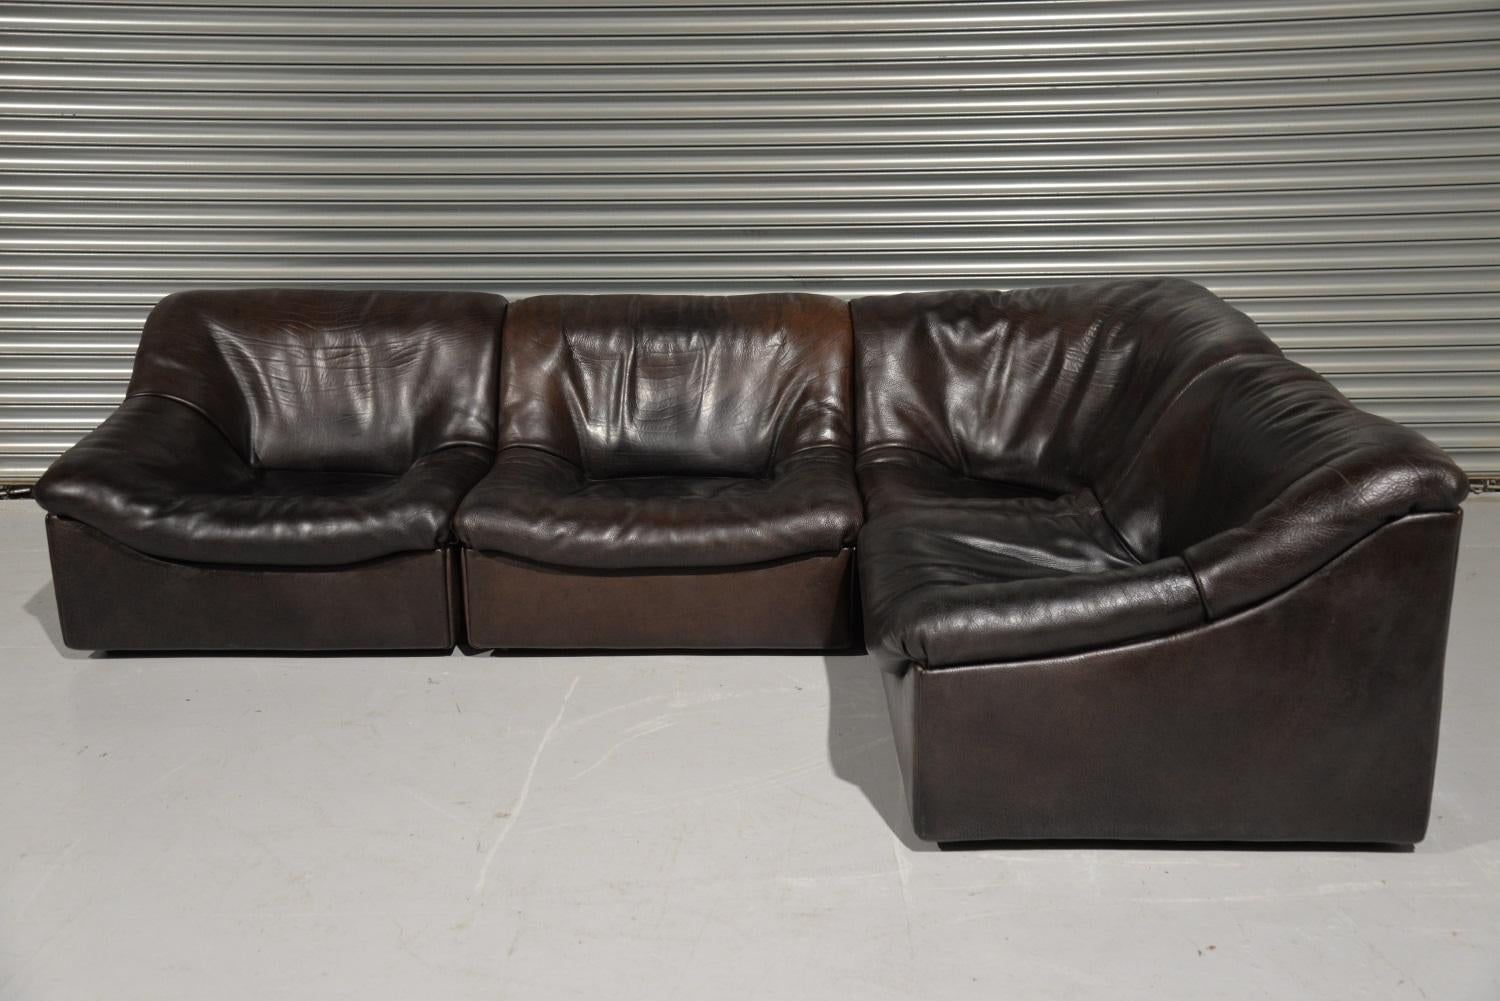 Discounted airfreight for our US and International customers (from 2 weeks door to door).

We are delighted to bring to you a beautiful sectional model DS 46 Buffalo leather sofa of the highest quality by De Sede. This sofa, consisting of 4